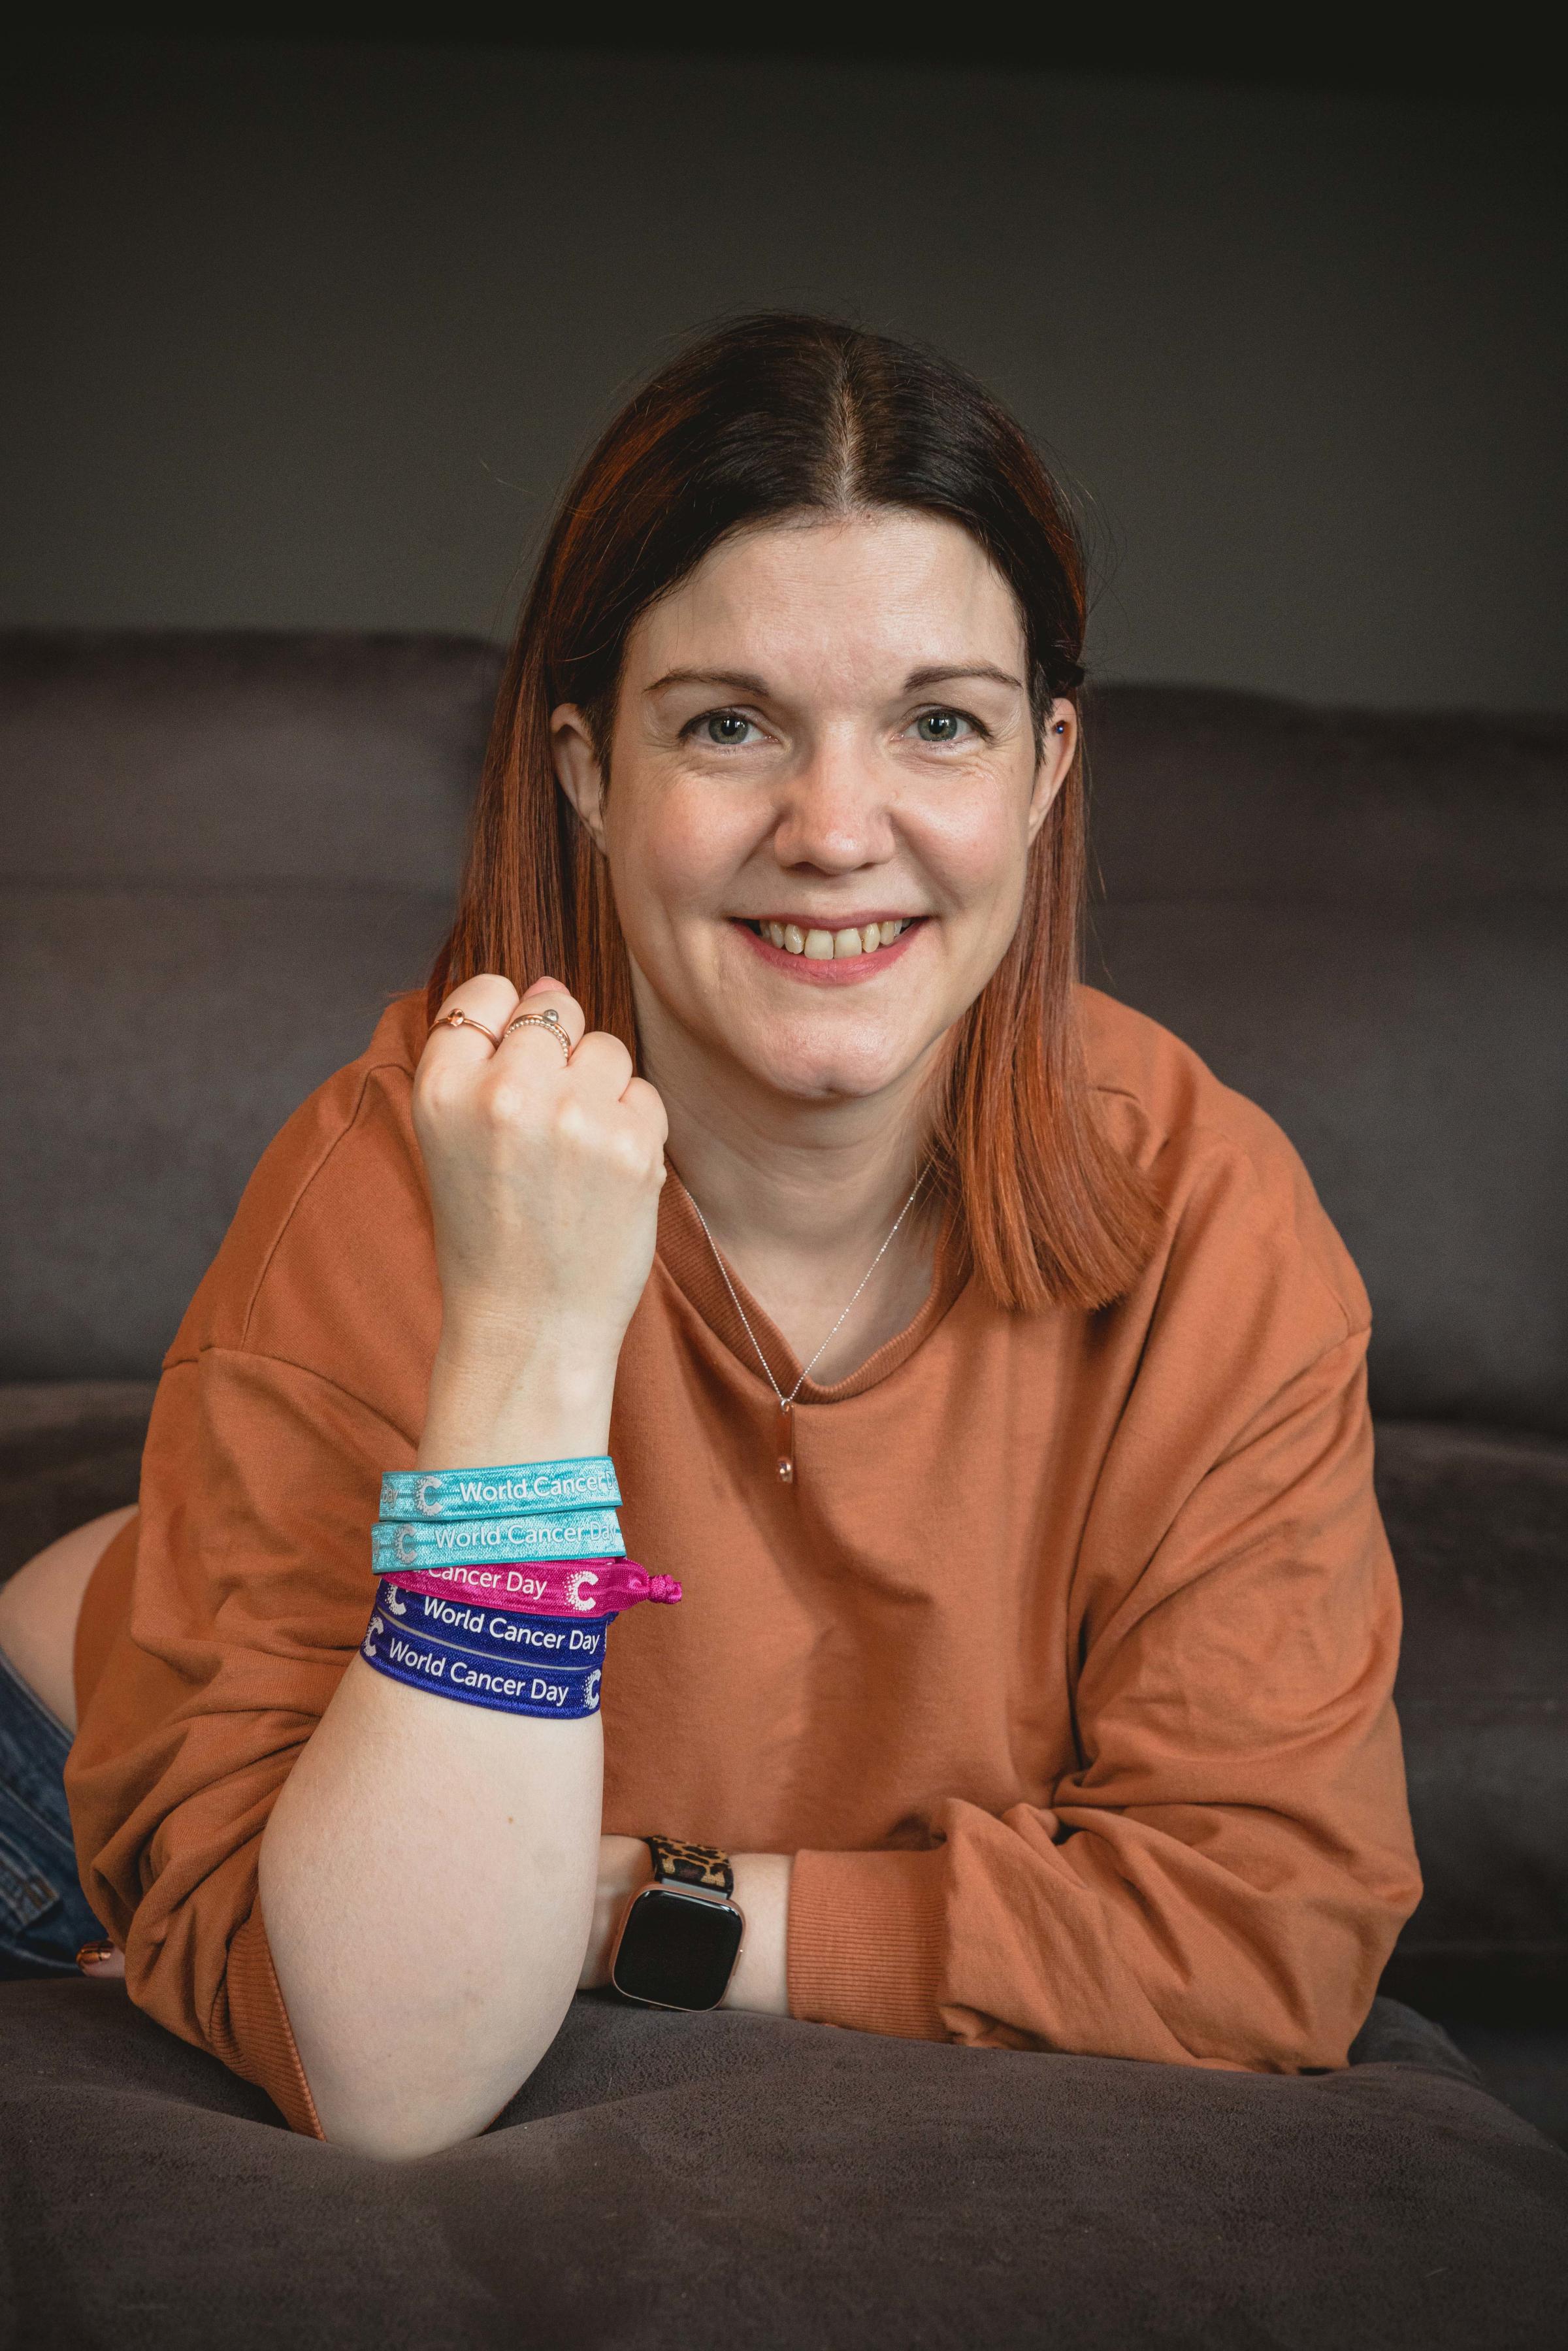 Sam Self is encouraging people to buy and wear a Cancer Research UK Unity Band this World Cancer Day